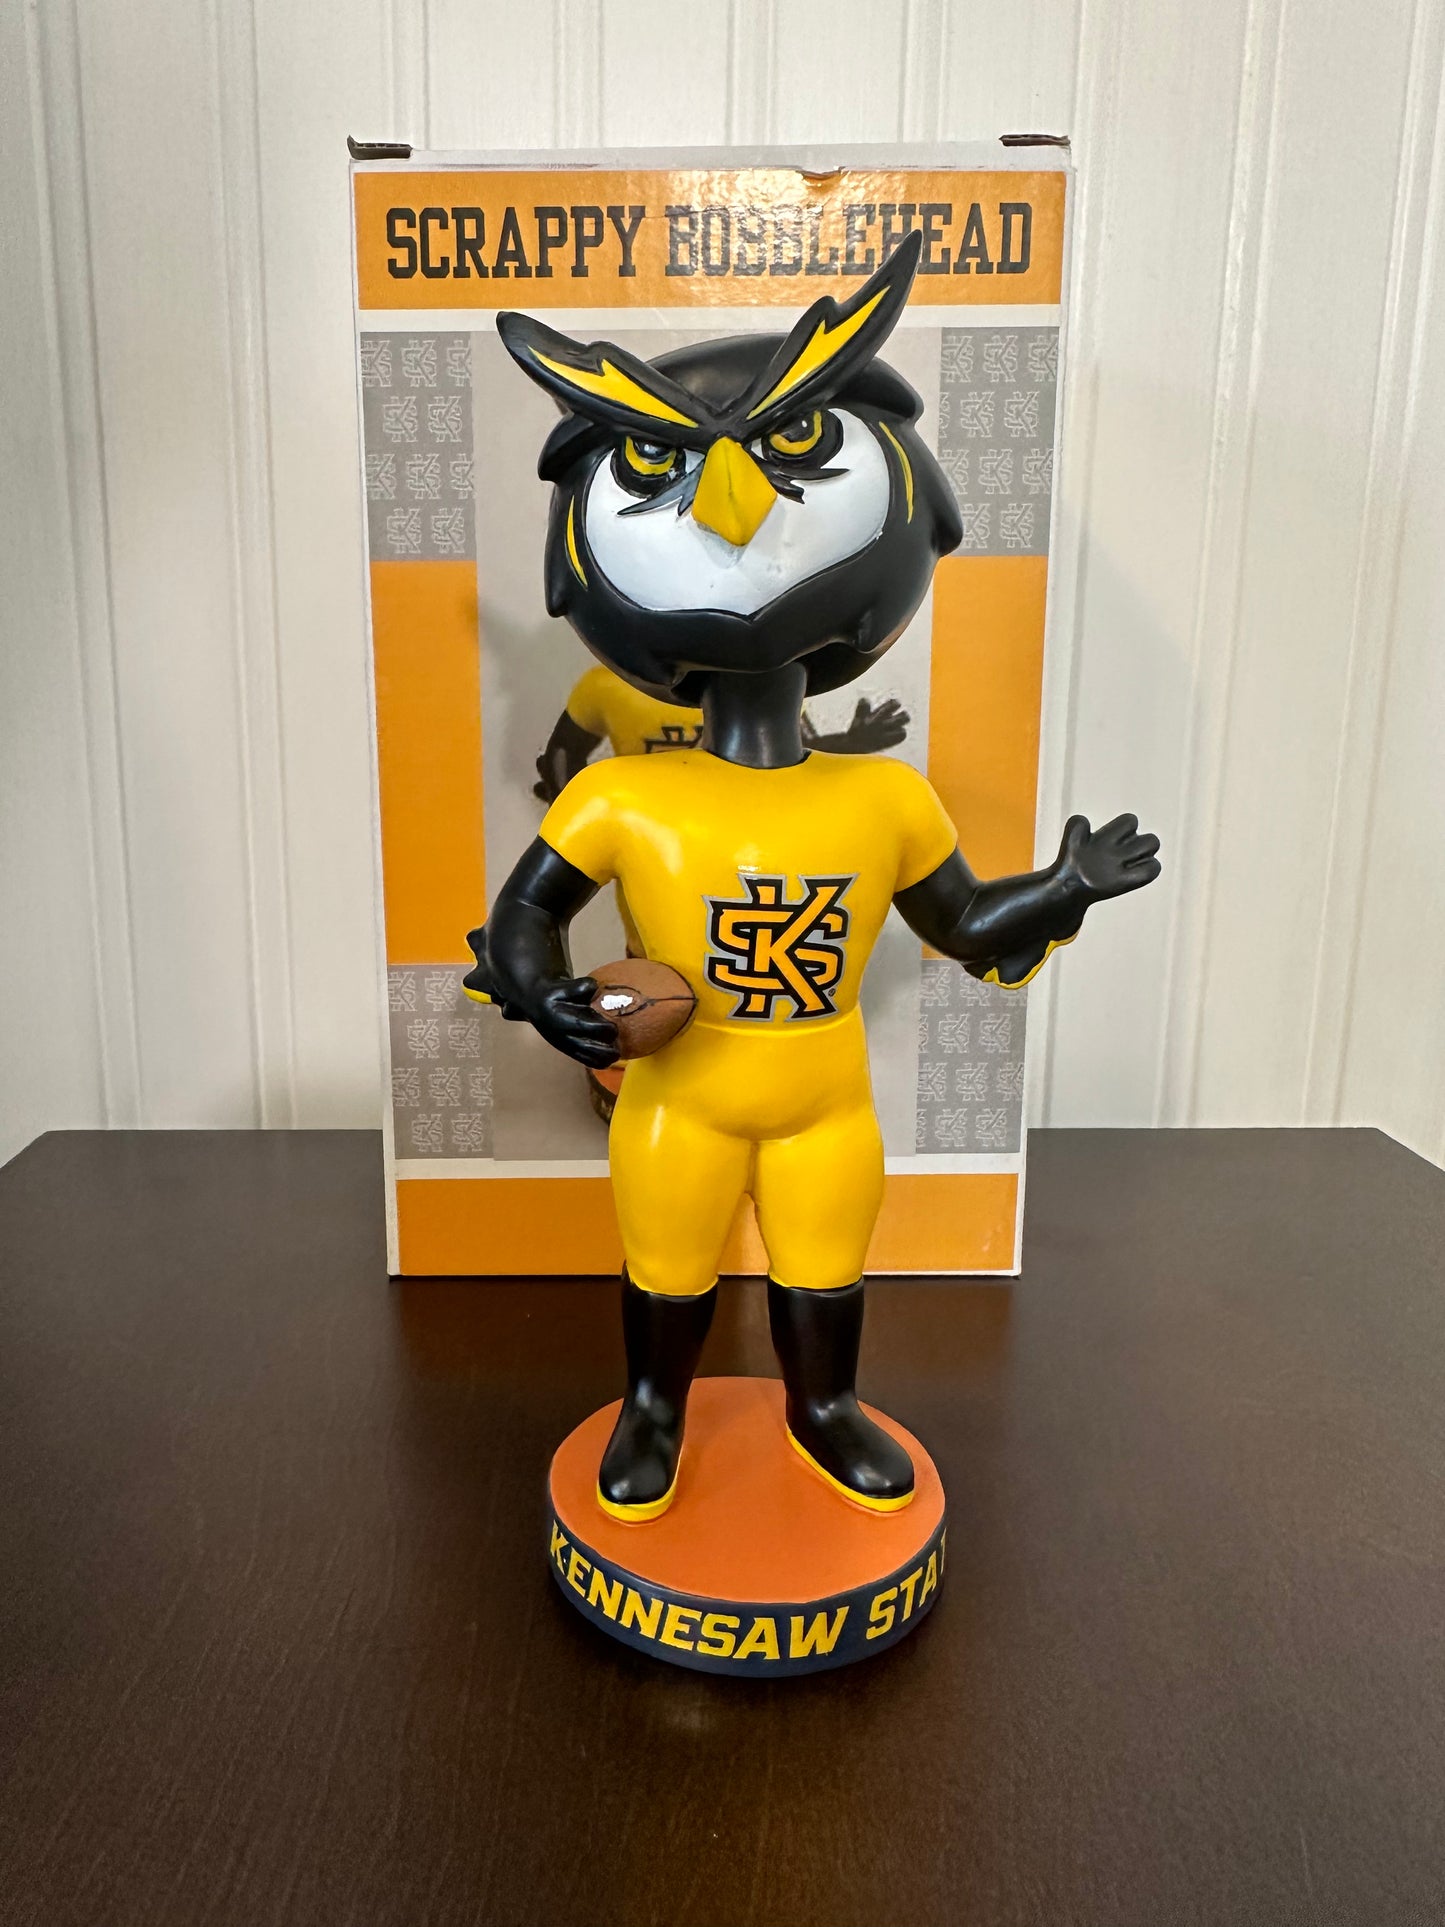 Kennesaw State Scrappy Mascot Bobblehead